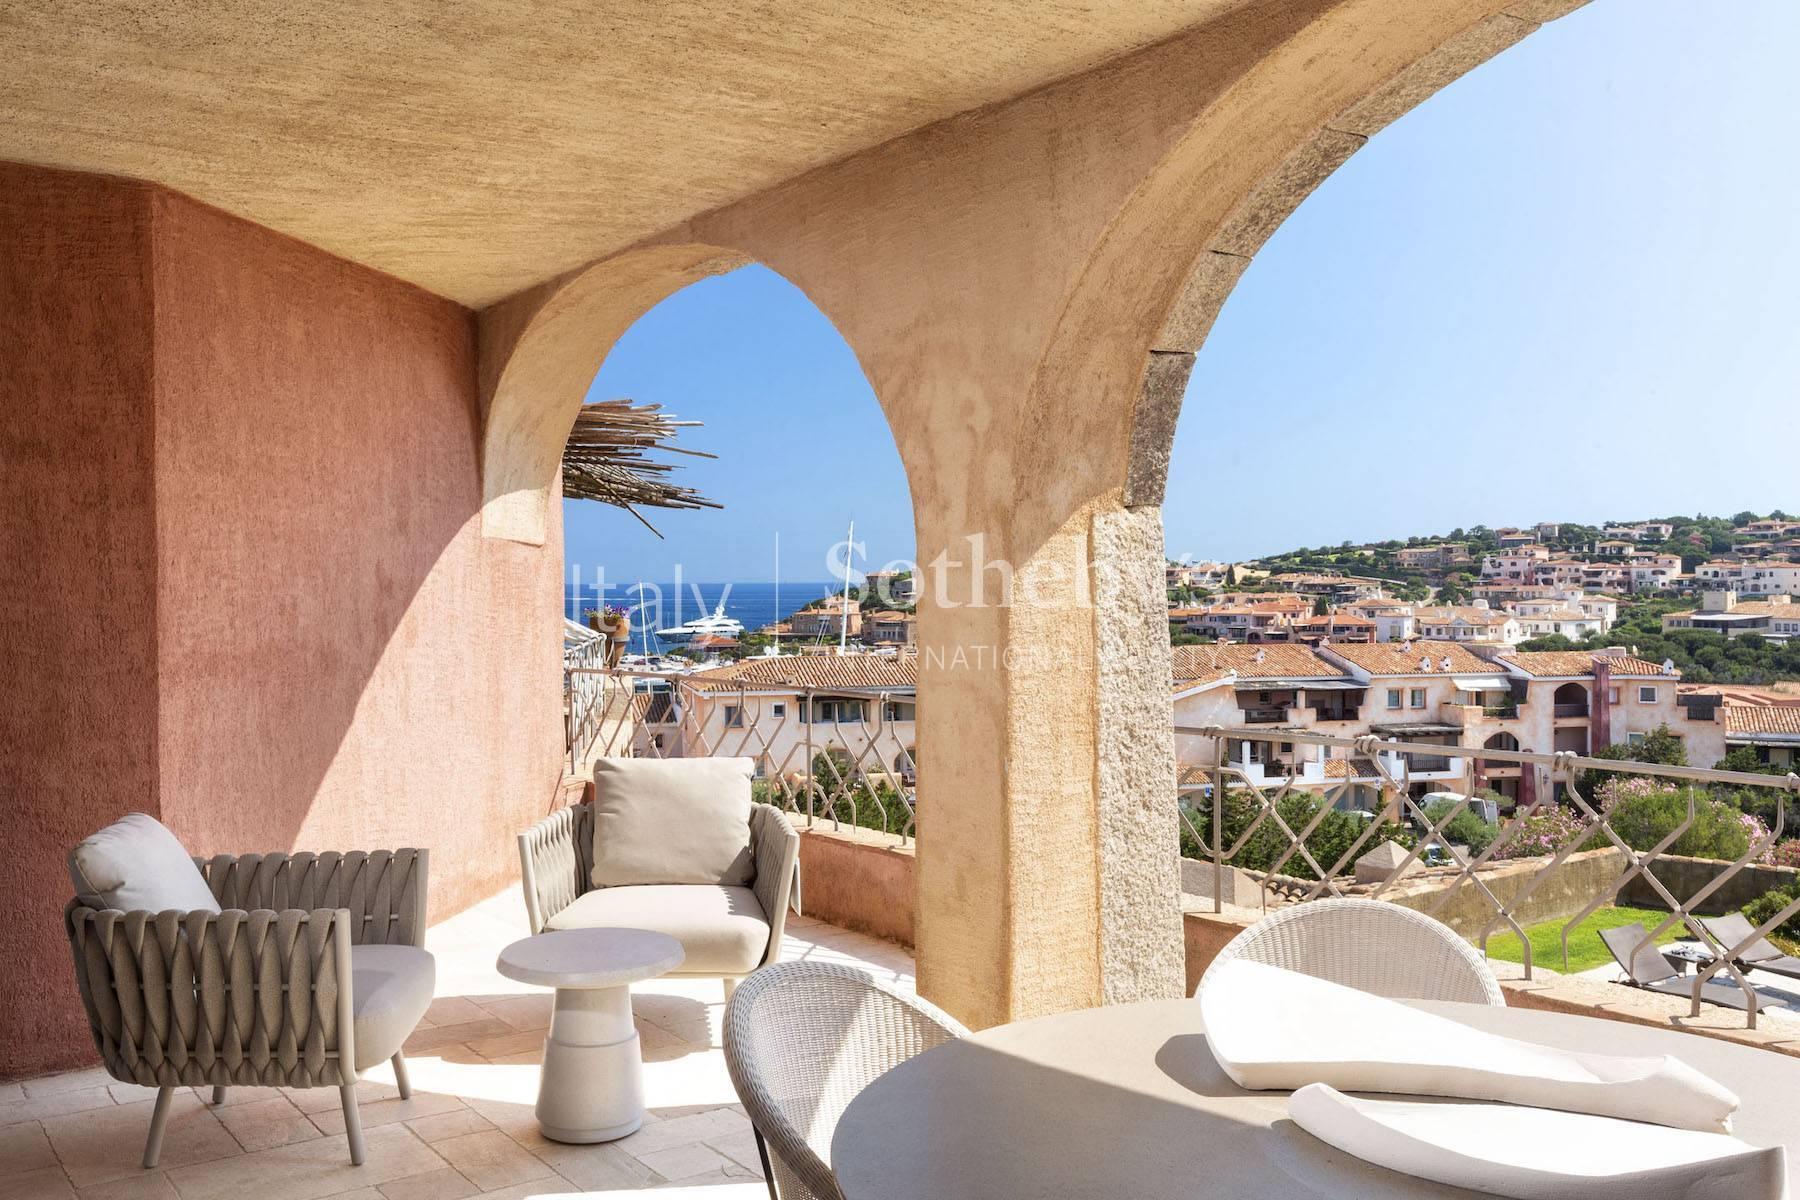 Elegantly furnished apartment with a picturesque view of the marina and the bay of Porto Cervo. - 2